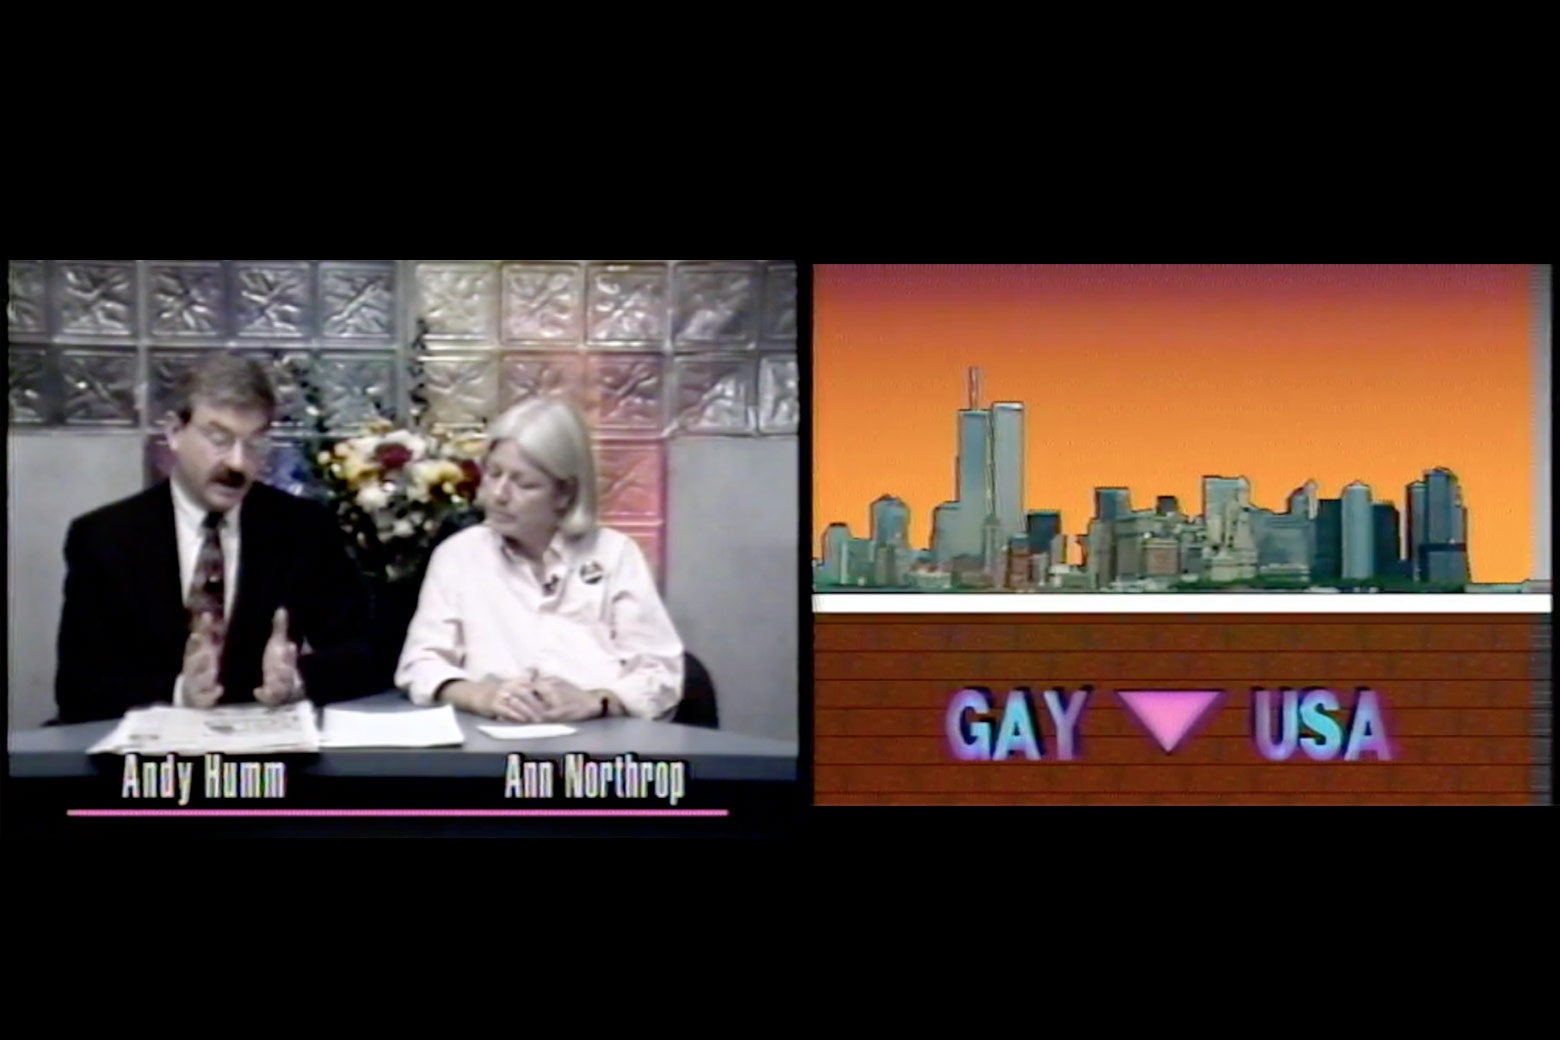 Diptych of Andy Humm and Ann Northrop hosting Gay USA next to the Gay USA title card